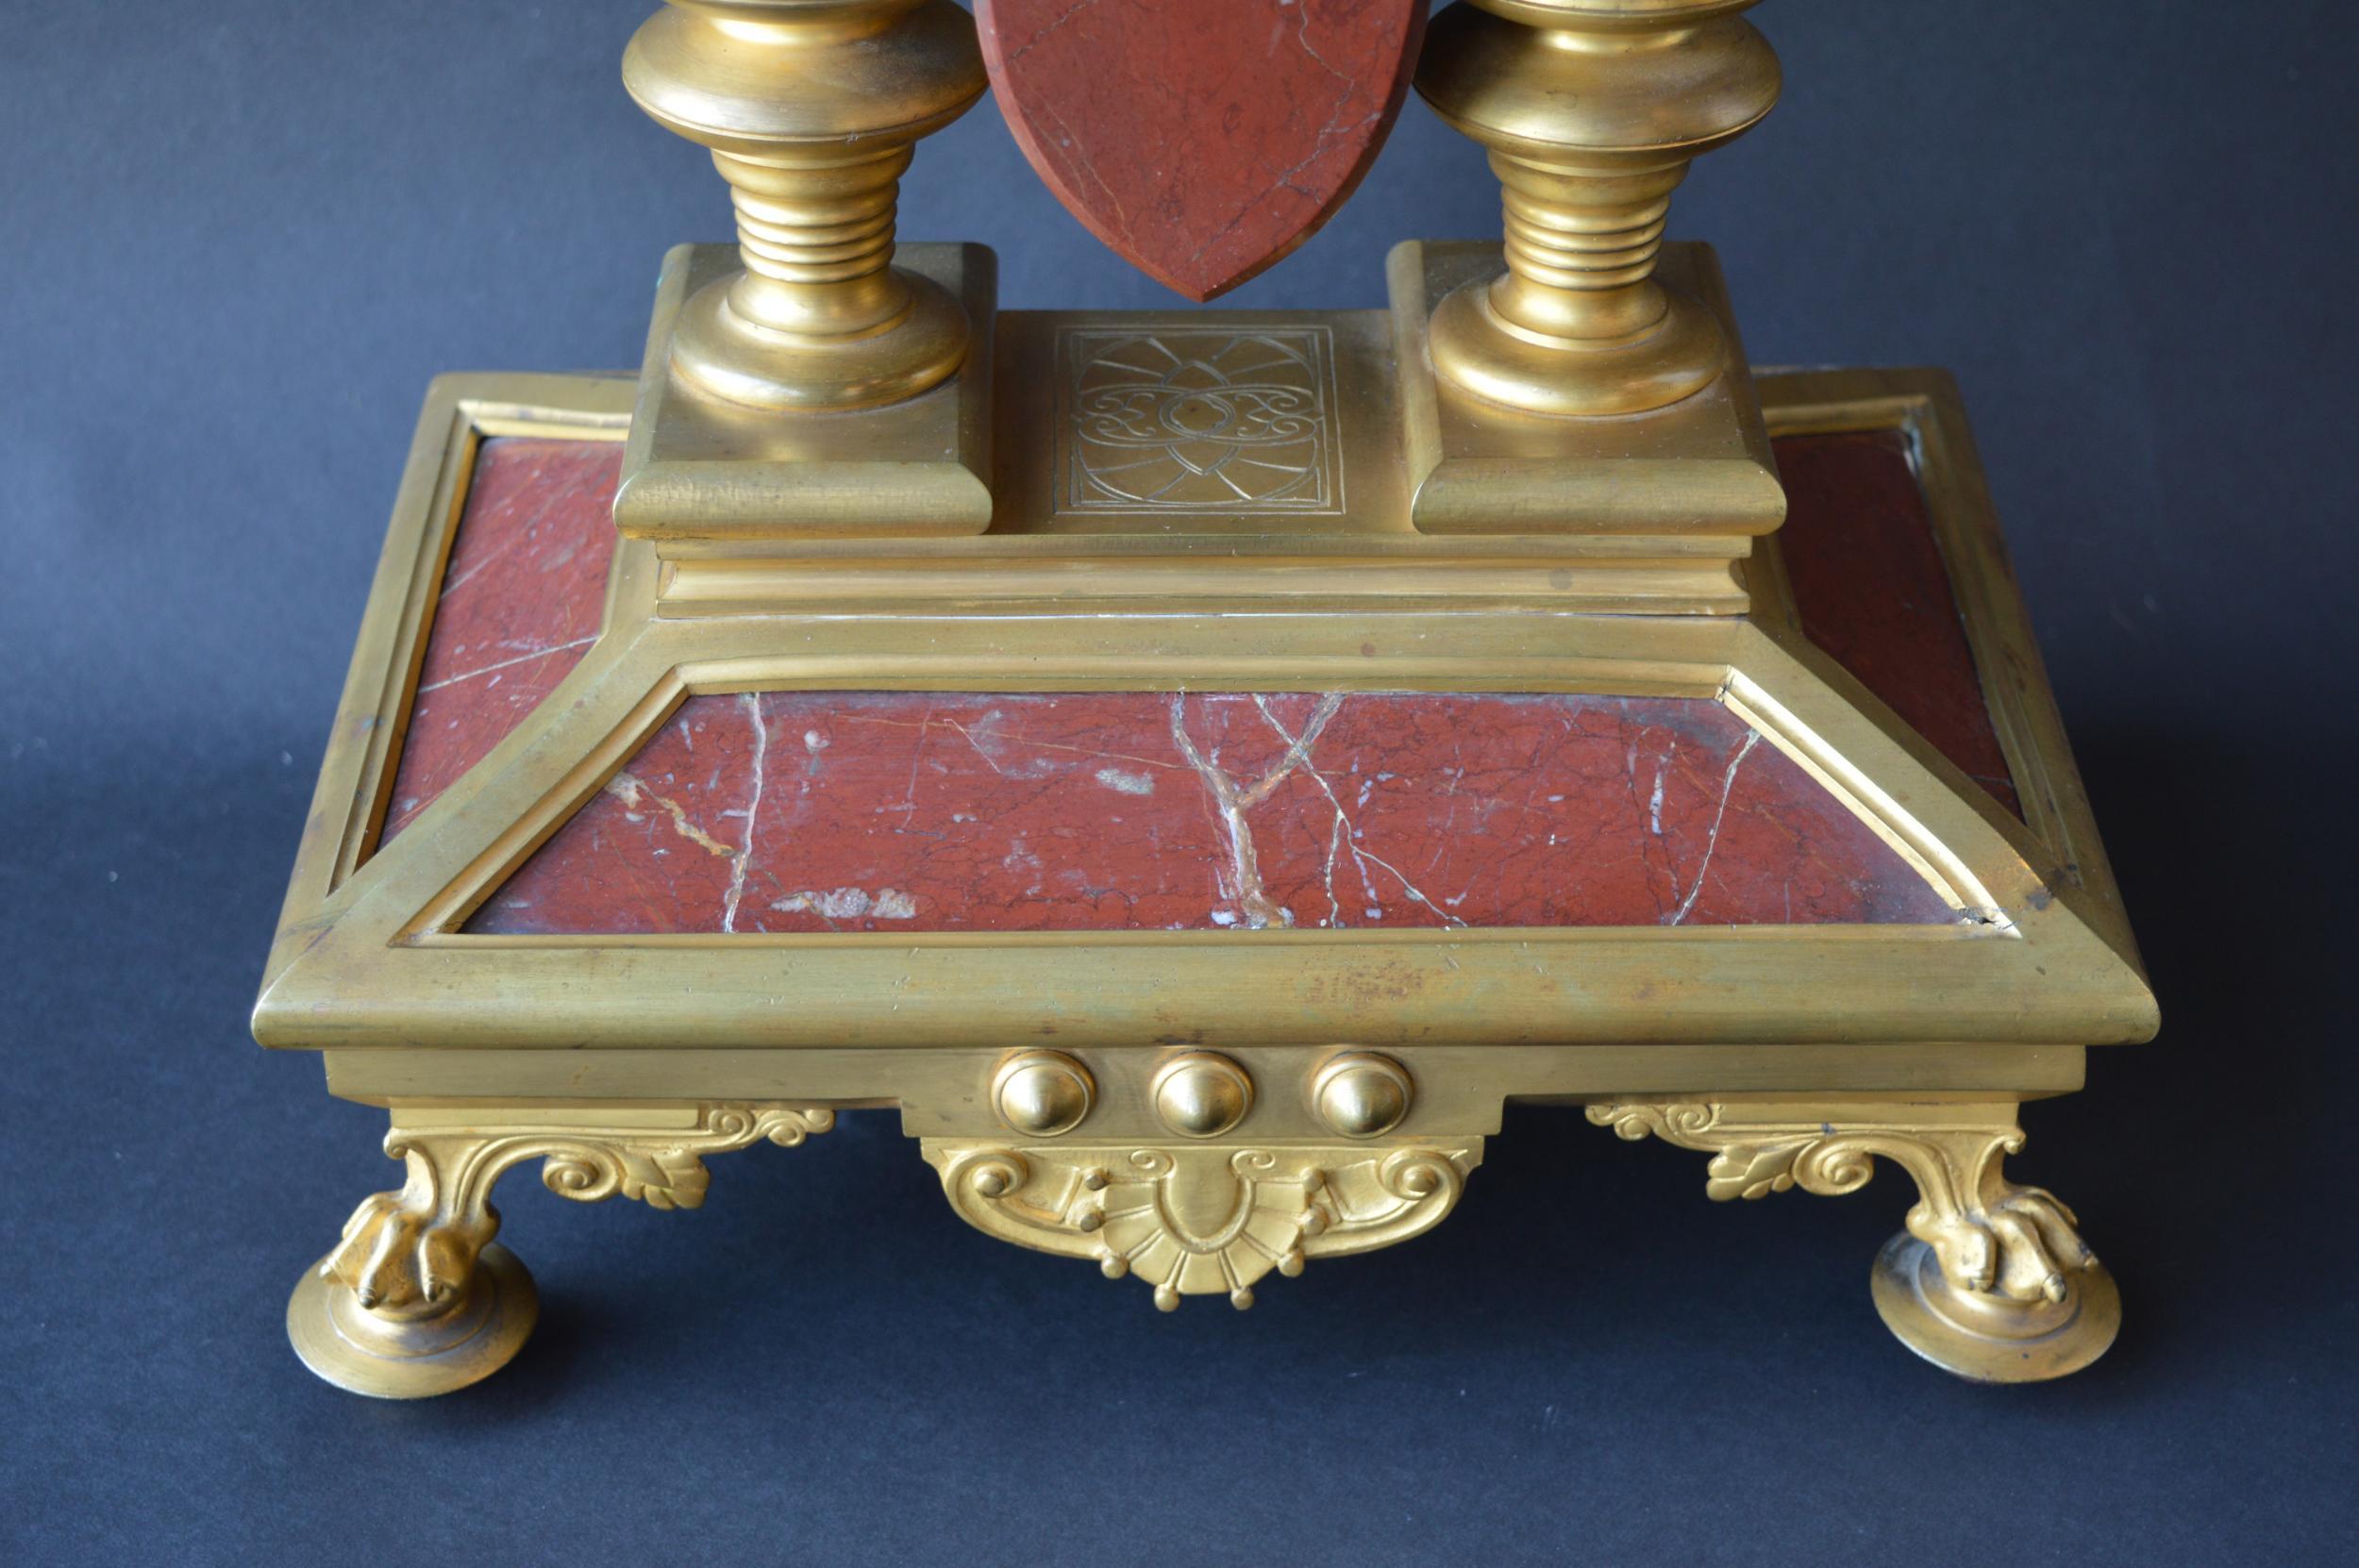 Large unusual French Neo-Grec Revival gilt bronze mounted marble mantel (fireplace) clock, circa 1870. The shaped rouge griotte marble arched case centering a circular dial with gilt Roman chapters and steel Breguet hands above twin key escapements,